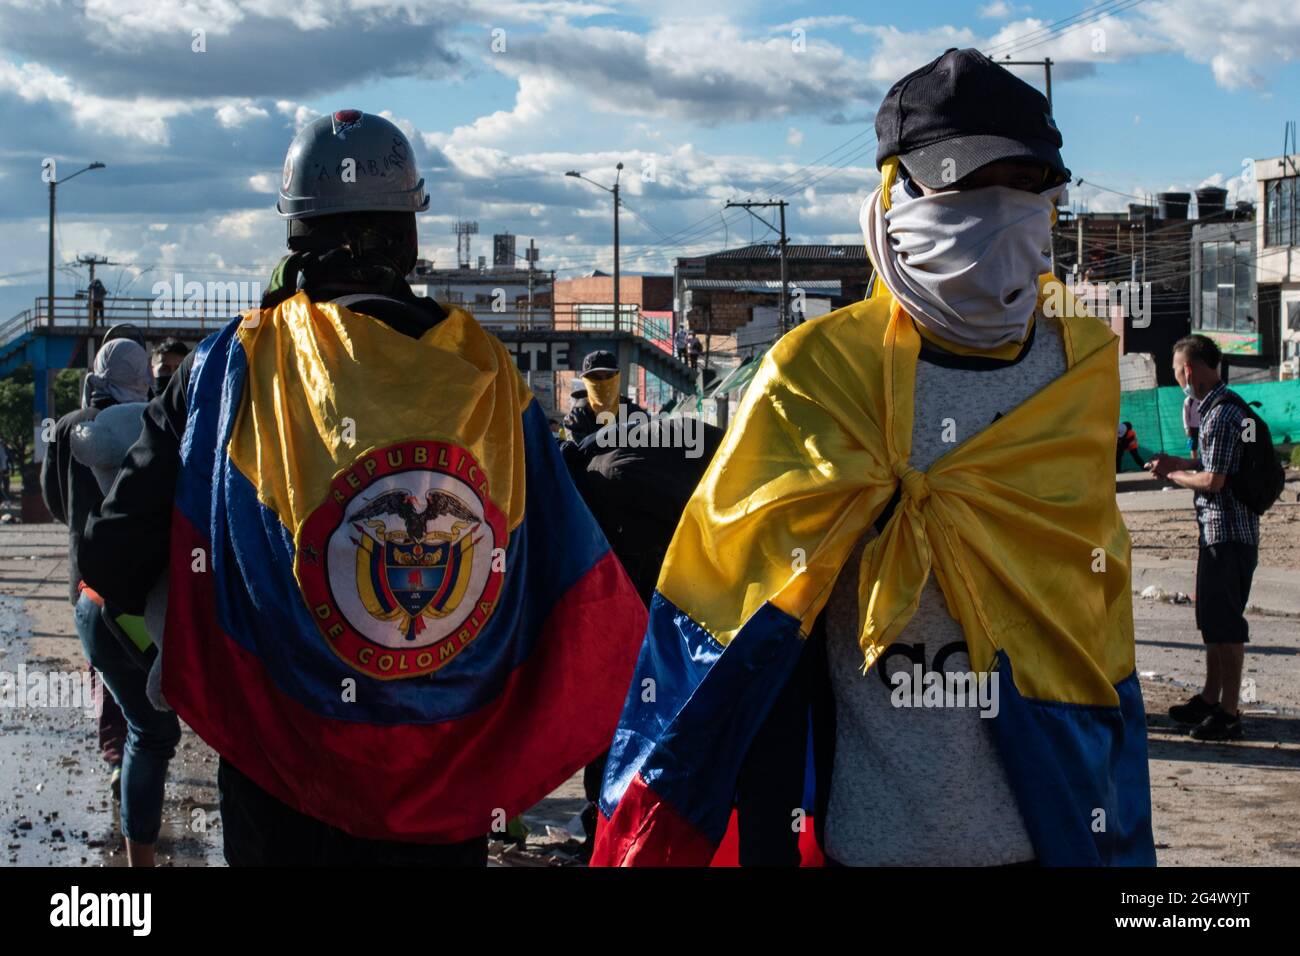 Bogota, Colombia. 21st June, 2021. Demonstrators cover their faces while using Colombia's national flag as capes as clashes between demonstratros and Colombia's riot police erupt anti-government protest raise in Bogota Colombia against the government of president Ivan Duque, inequalities and abuse of authority by police. Credit: Long Visual Press/Alamy Live News Stock Photo